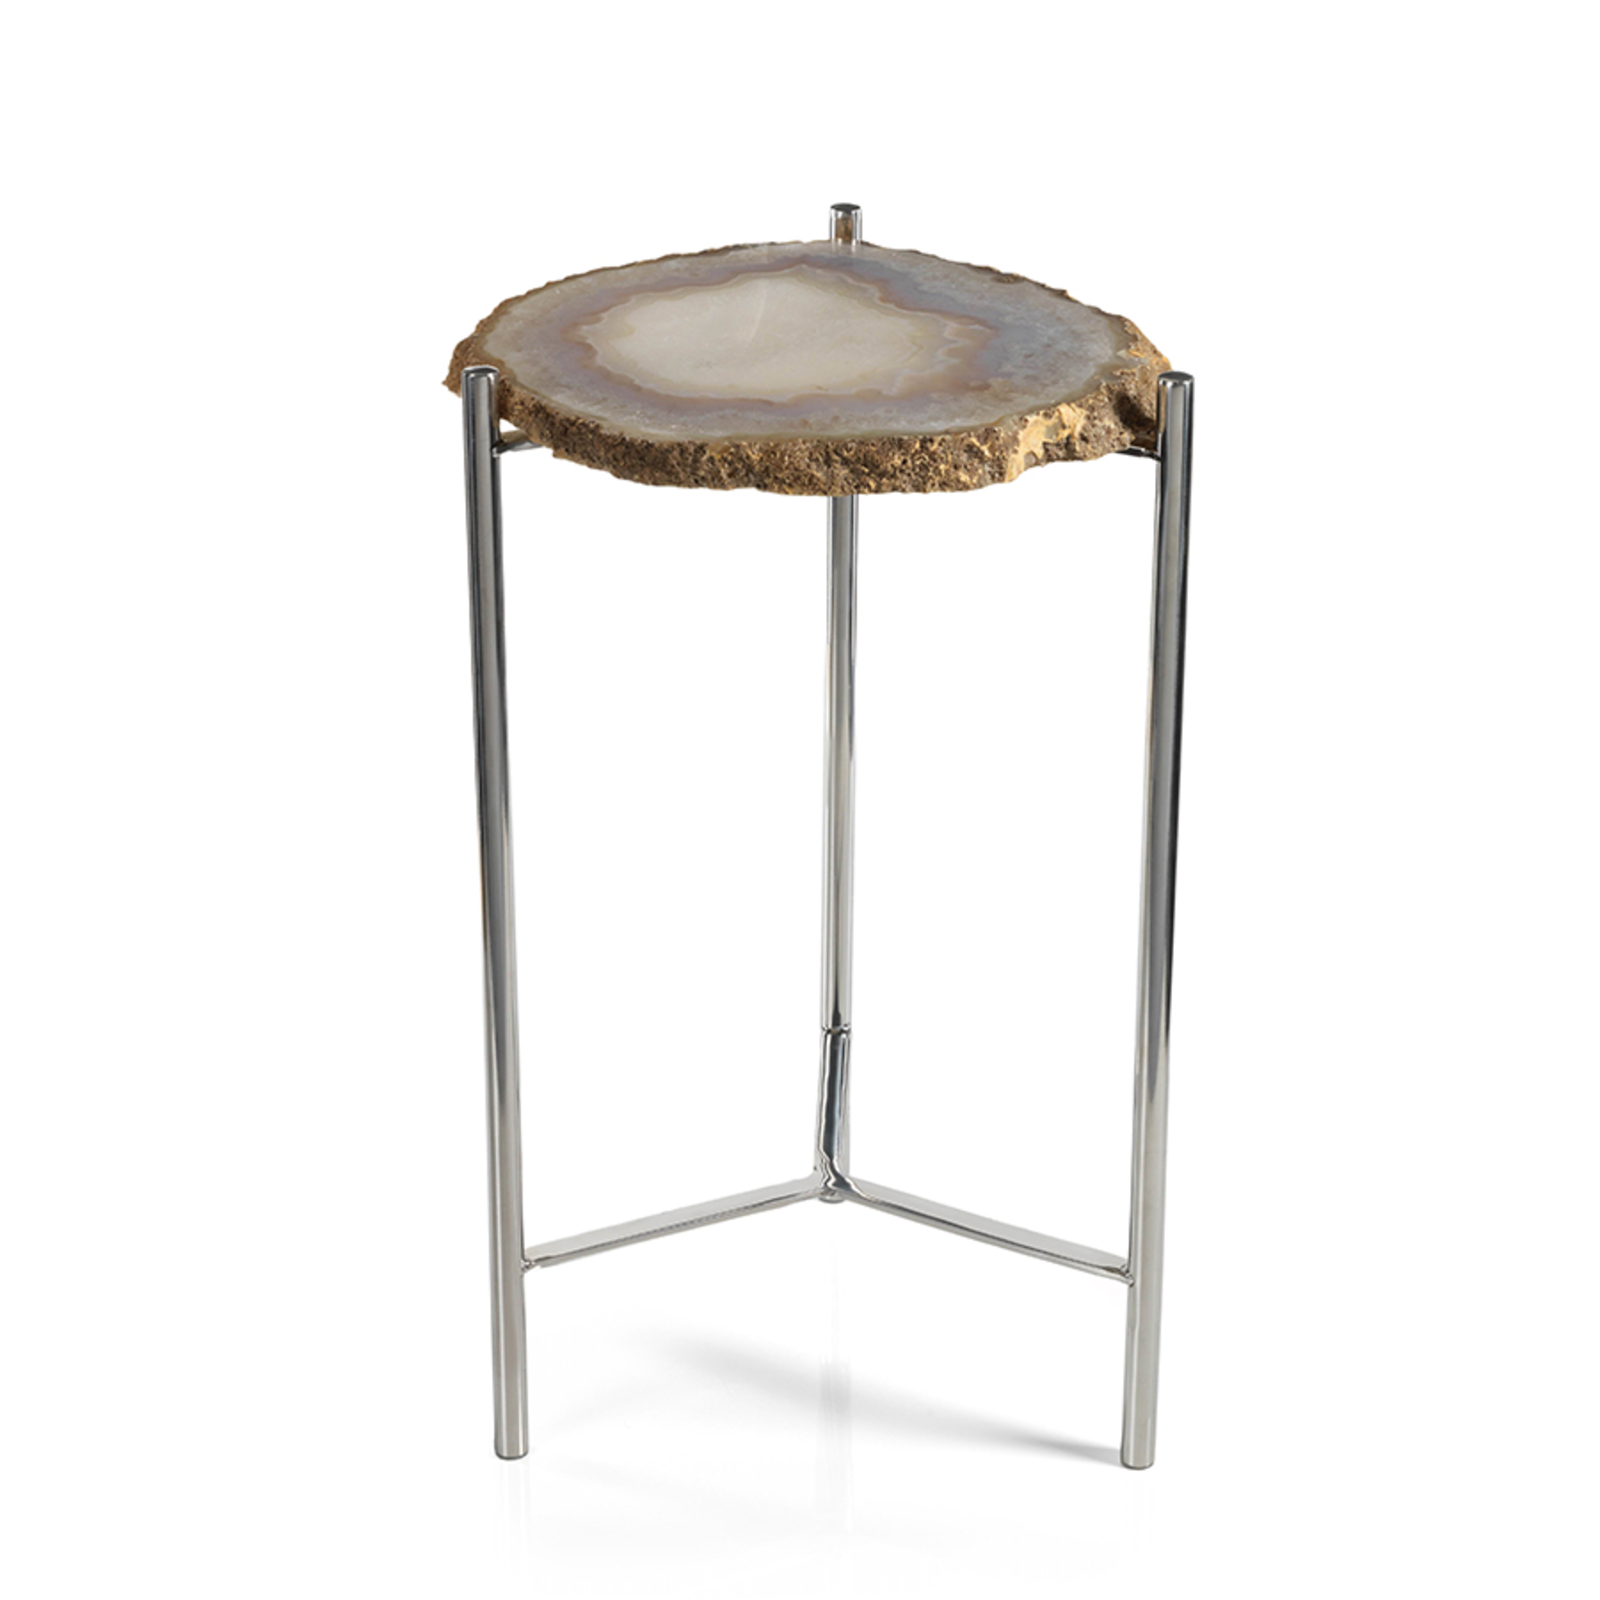 Zodax Savona Agate Accent Table IN-6265 loading=